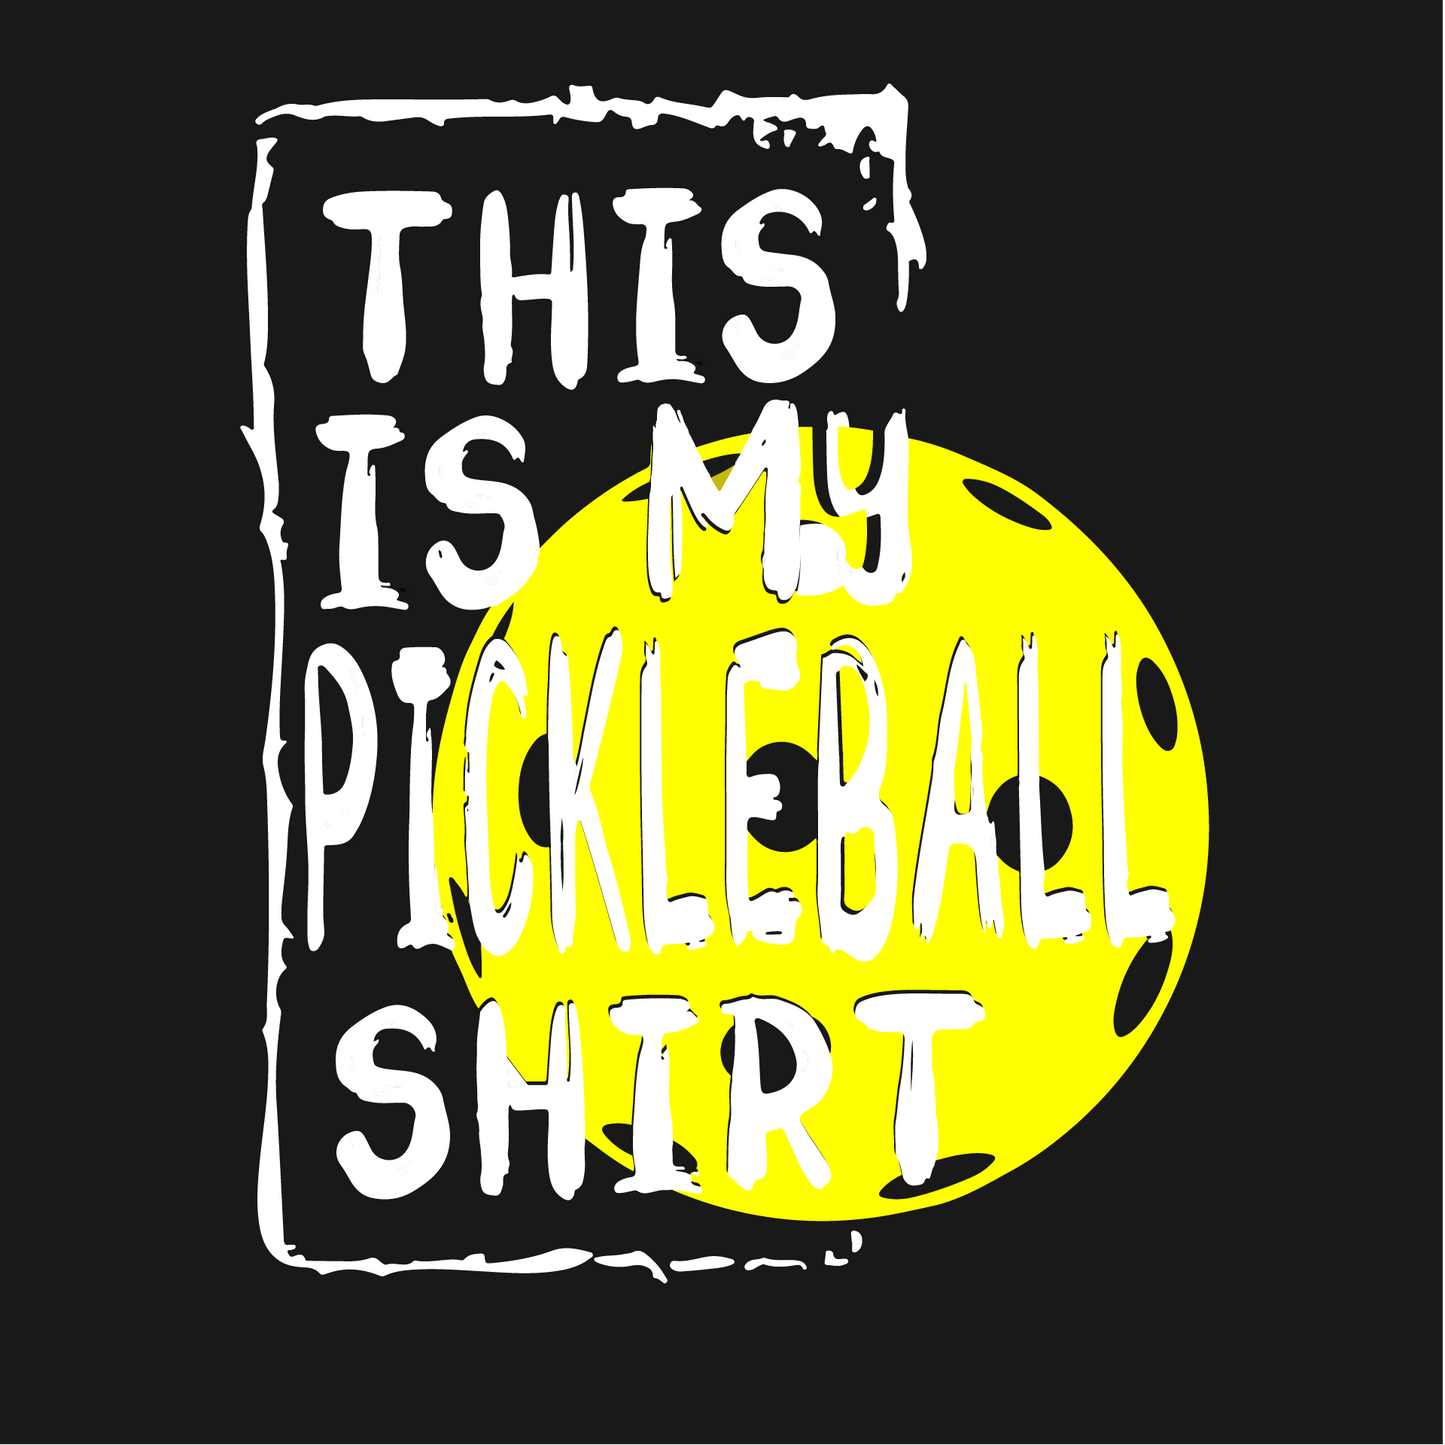 This Is My Pickleball Shirt | Men's Long Sleeve Athletic Shirt | 100% Polyester